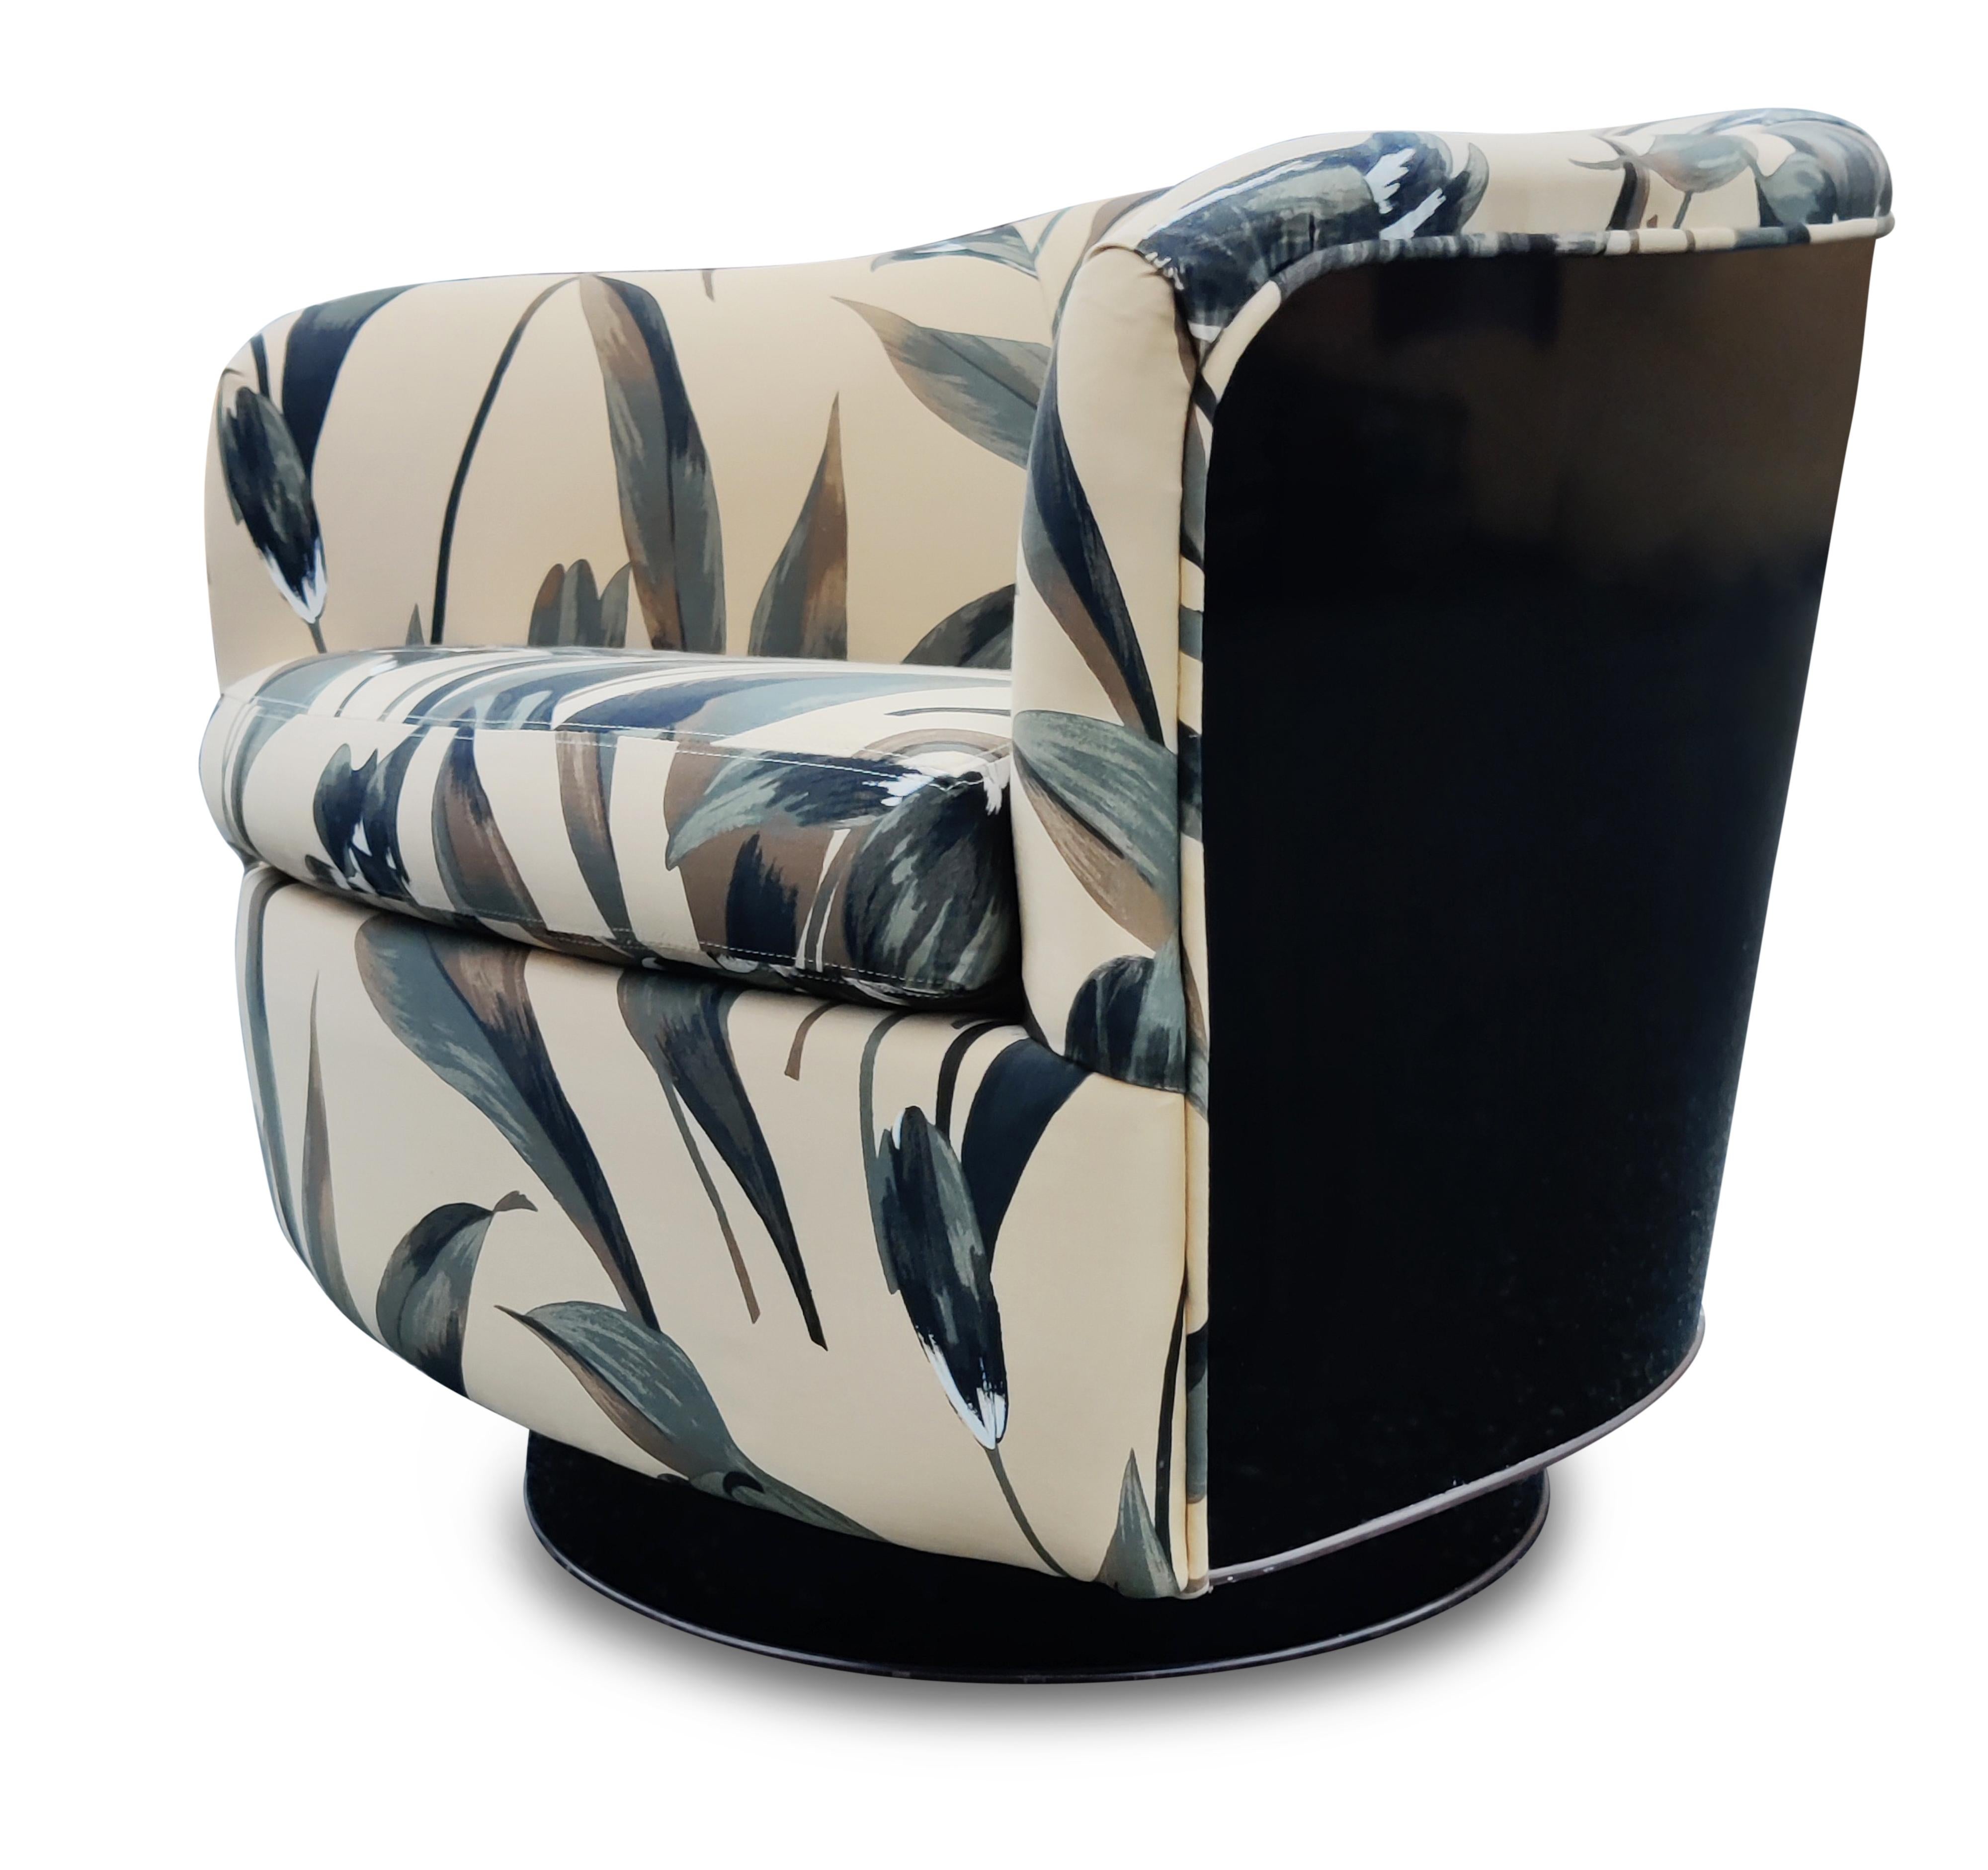 Designed by Milo Baughman for Thayer Coggin, this sexy chair is an absolutely iconic design. Theglossy black laminate backing is clean and bright and complements the warm patterned fabric very well. All of this sits on a laminate swivel